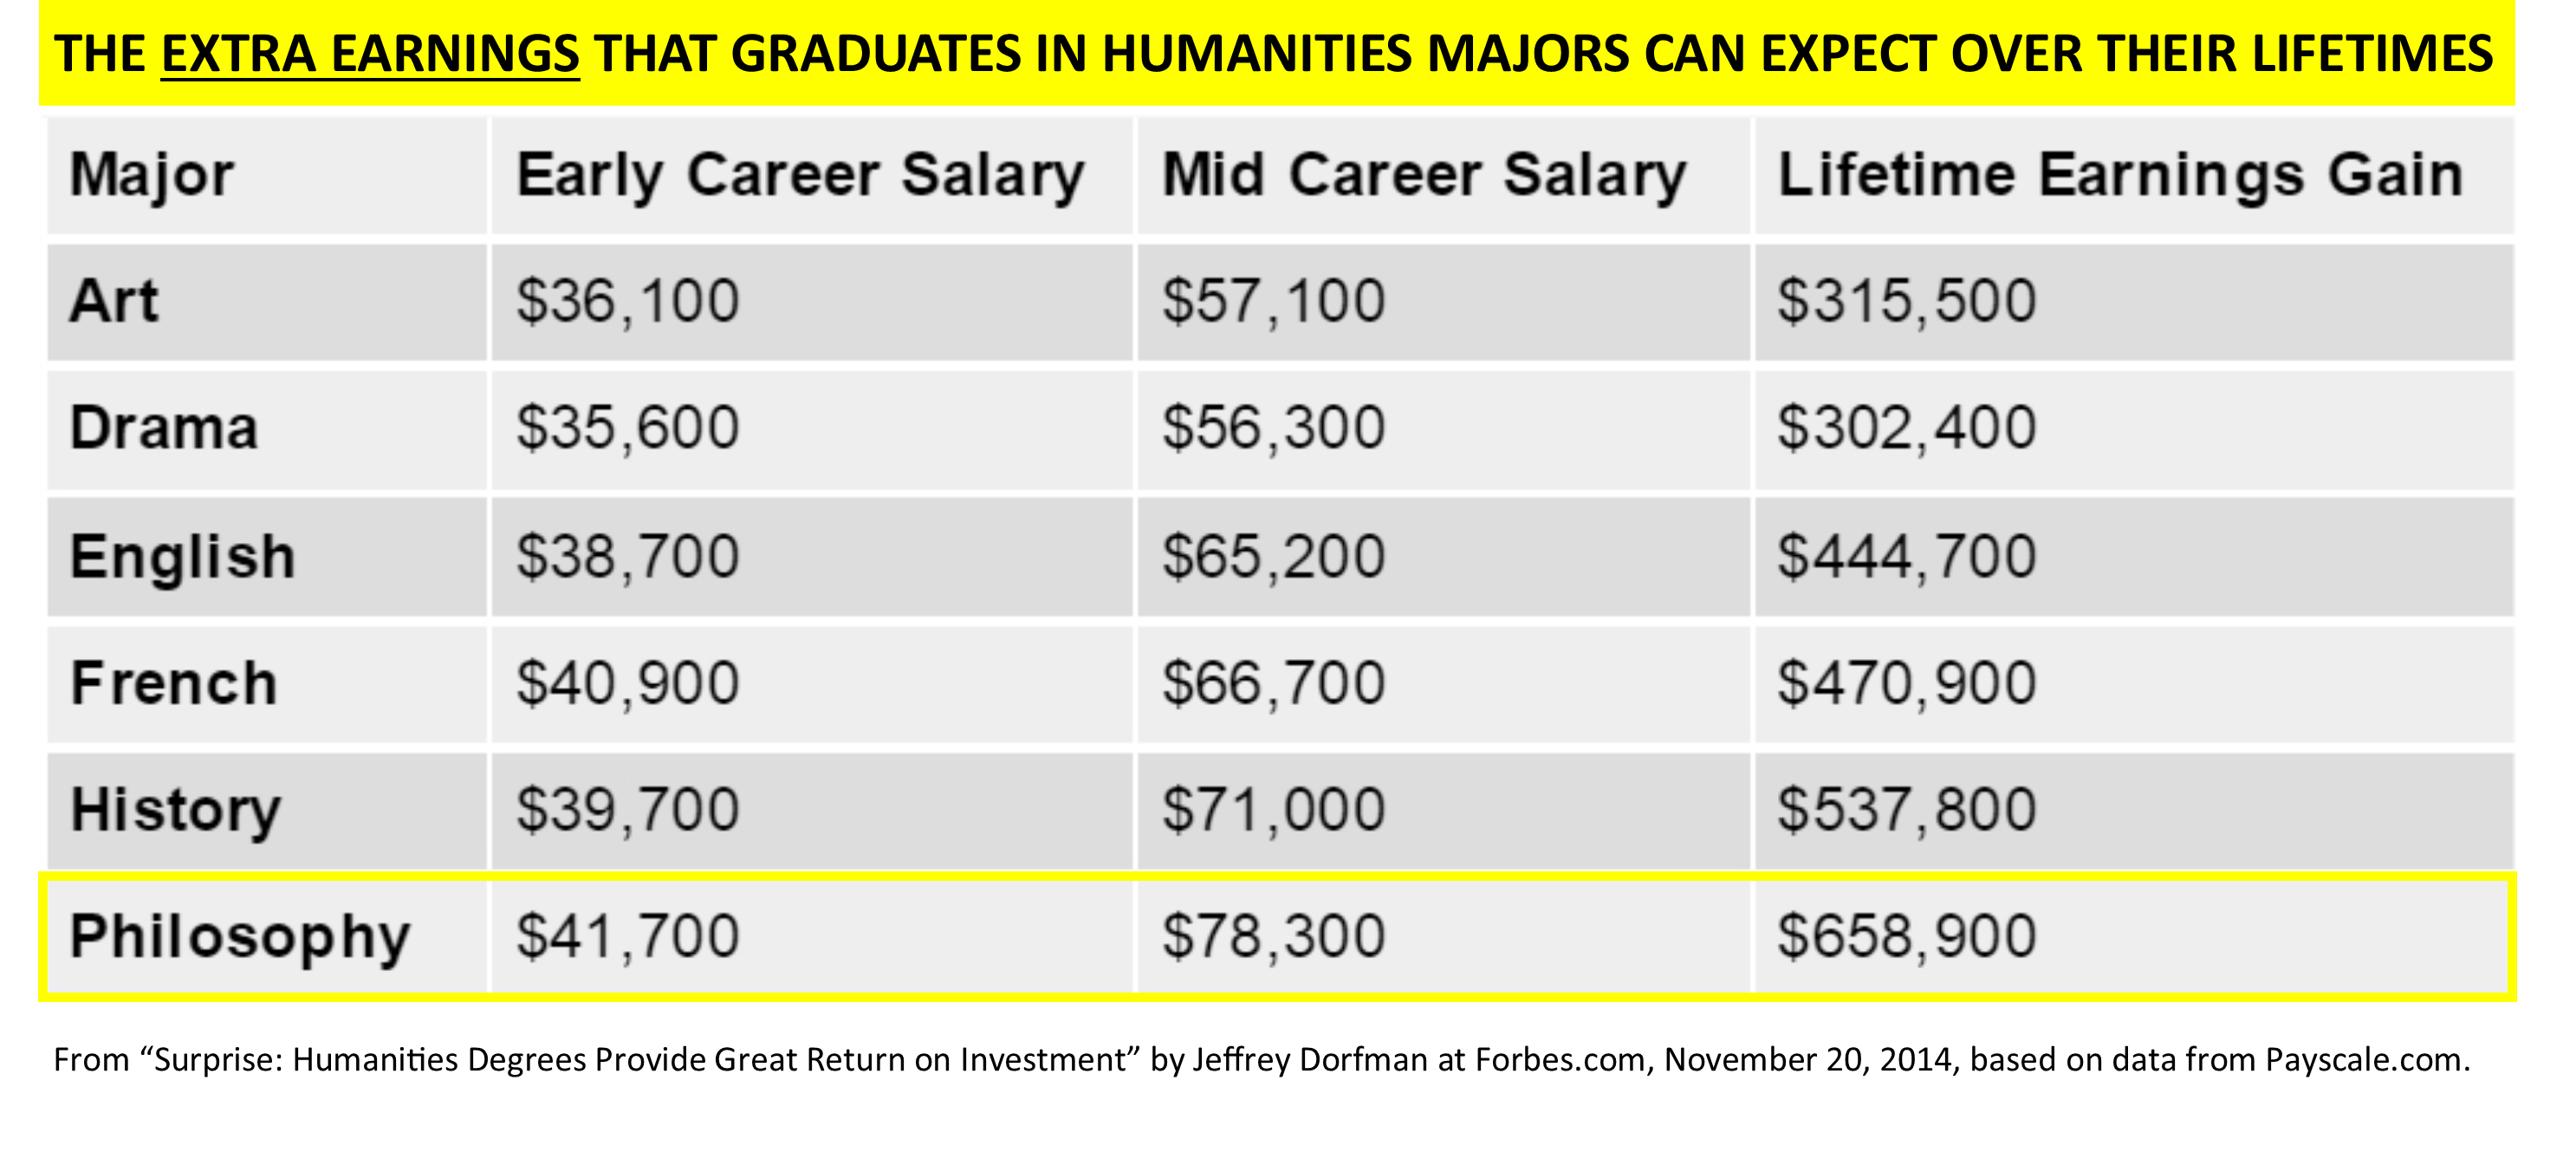 Chart displays the extra earnings that graduates in humanities majors can expect over their lives, highlighting philosophy majors as the highest earners